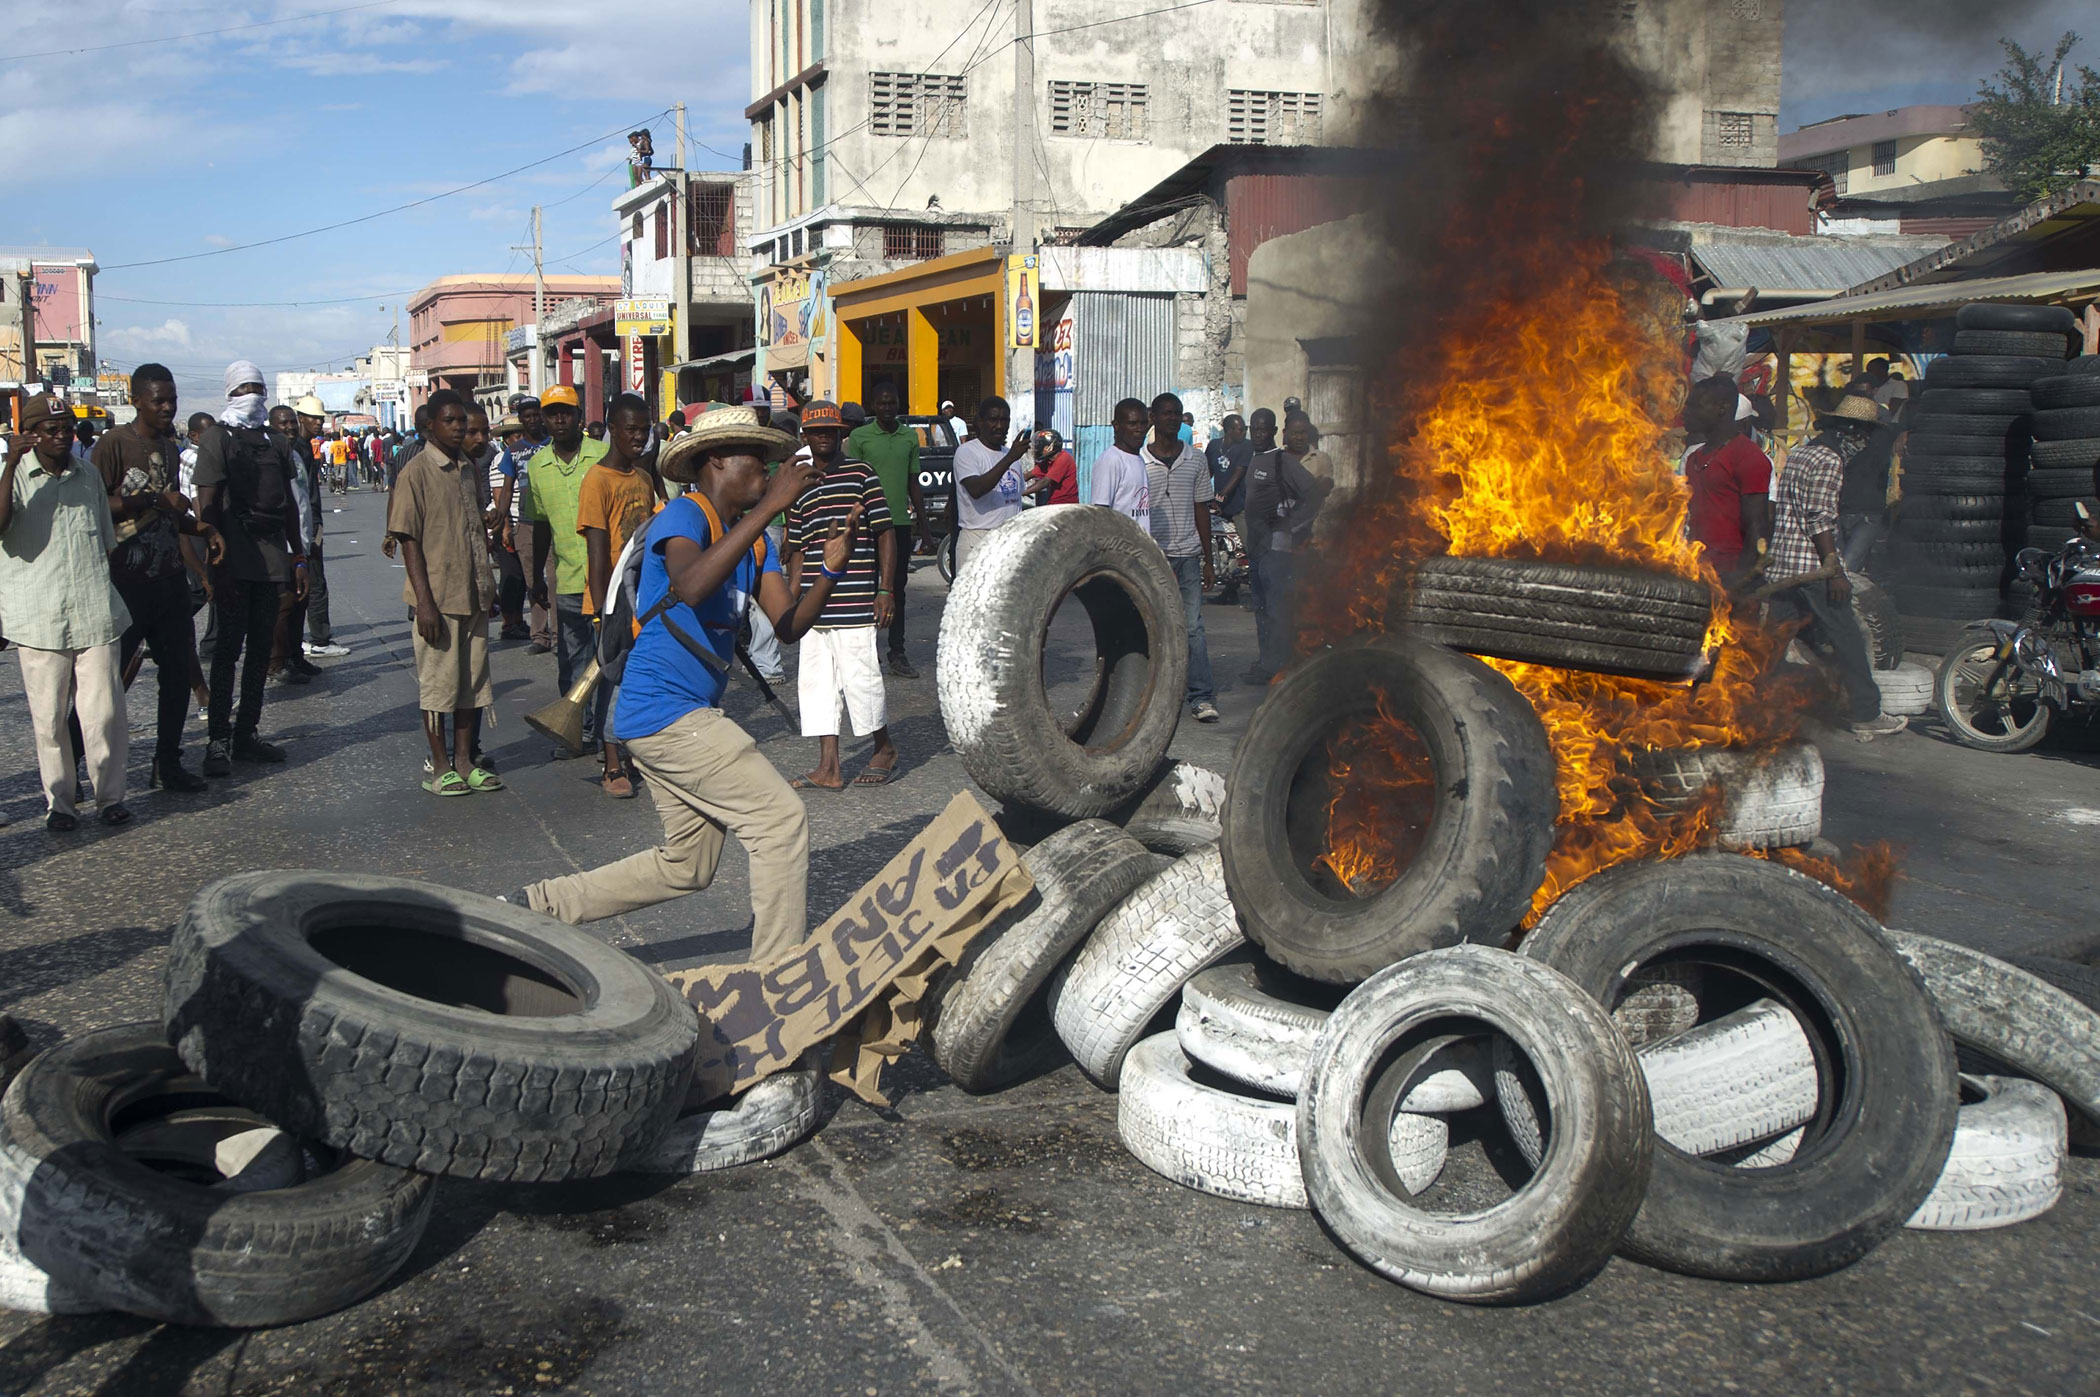 Protesters burn tires during a march against the government of Haitian President Michel Martelly in Port-au-Prince, Haiti on Jan. 11, 2015. (Hector Retamal—AFP/Getty Images)